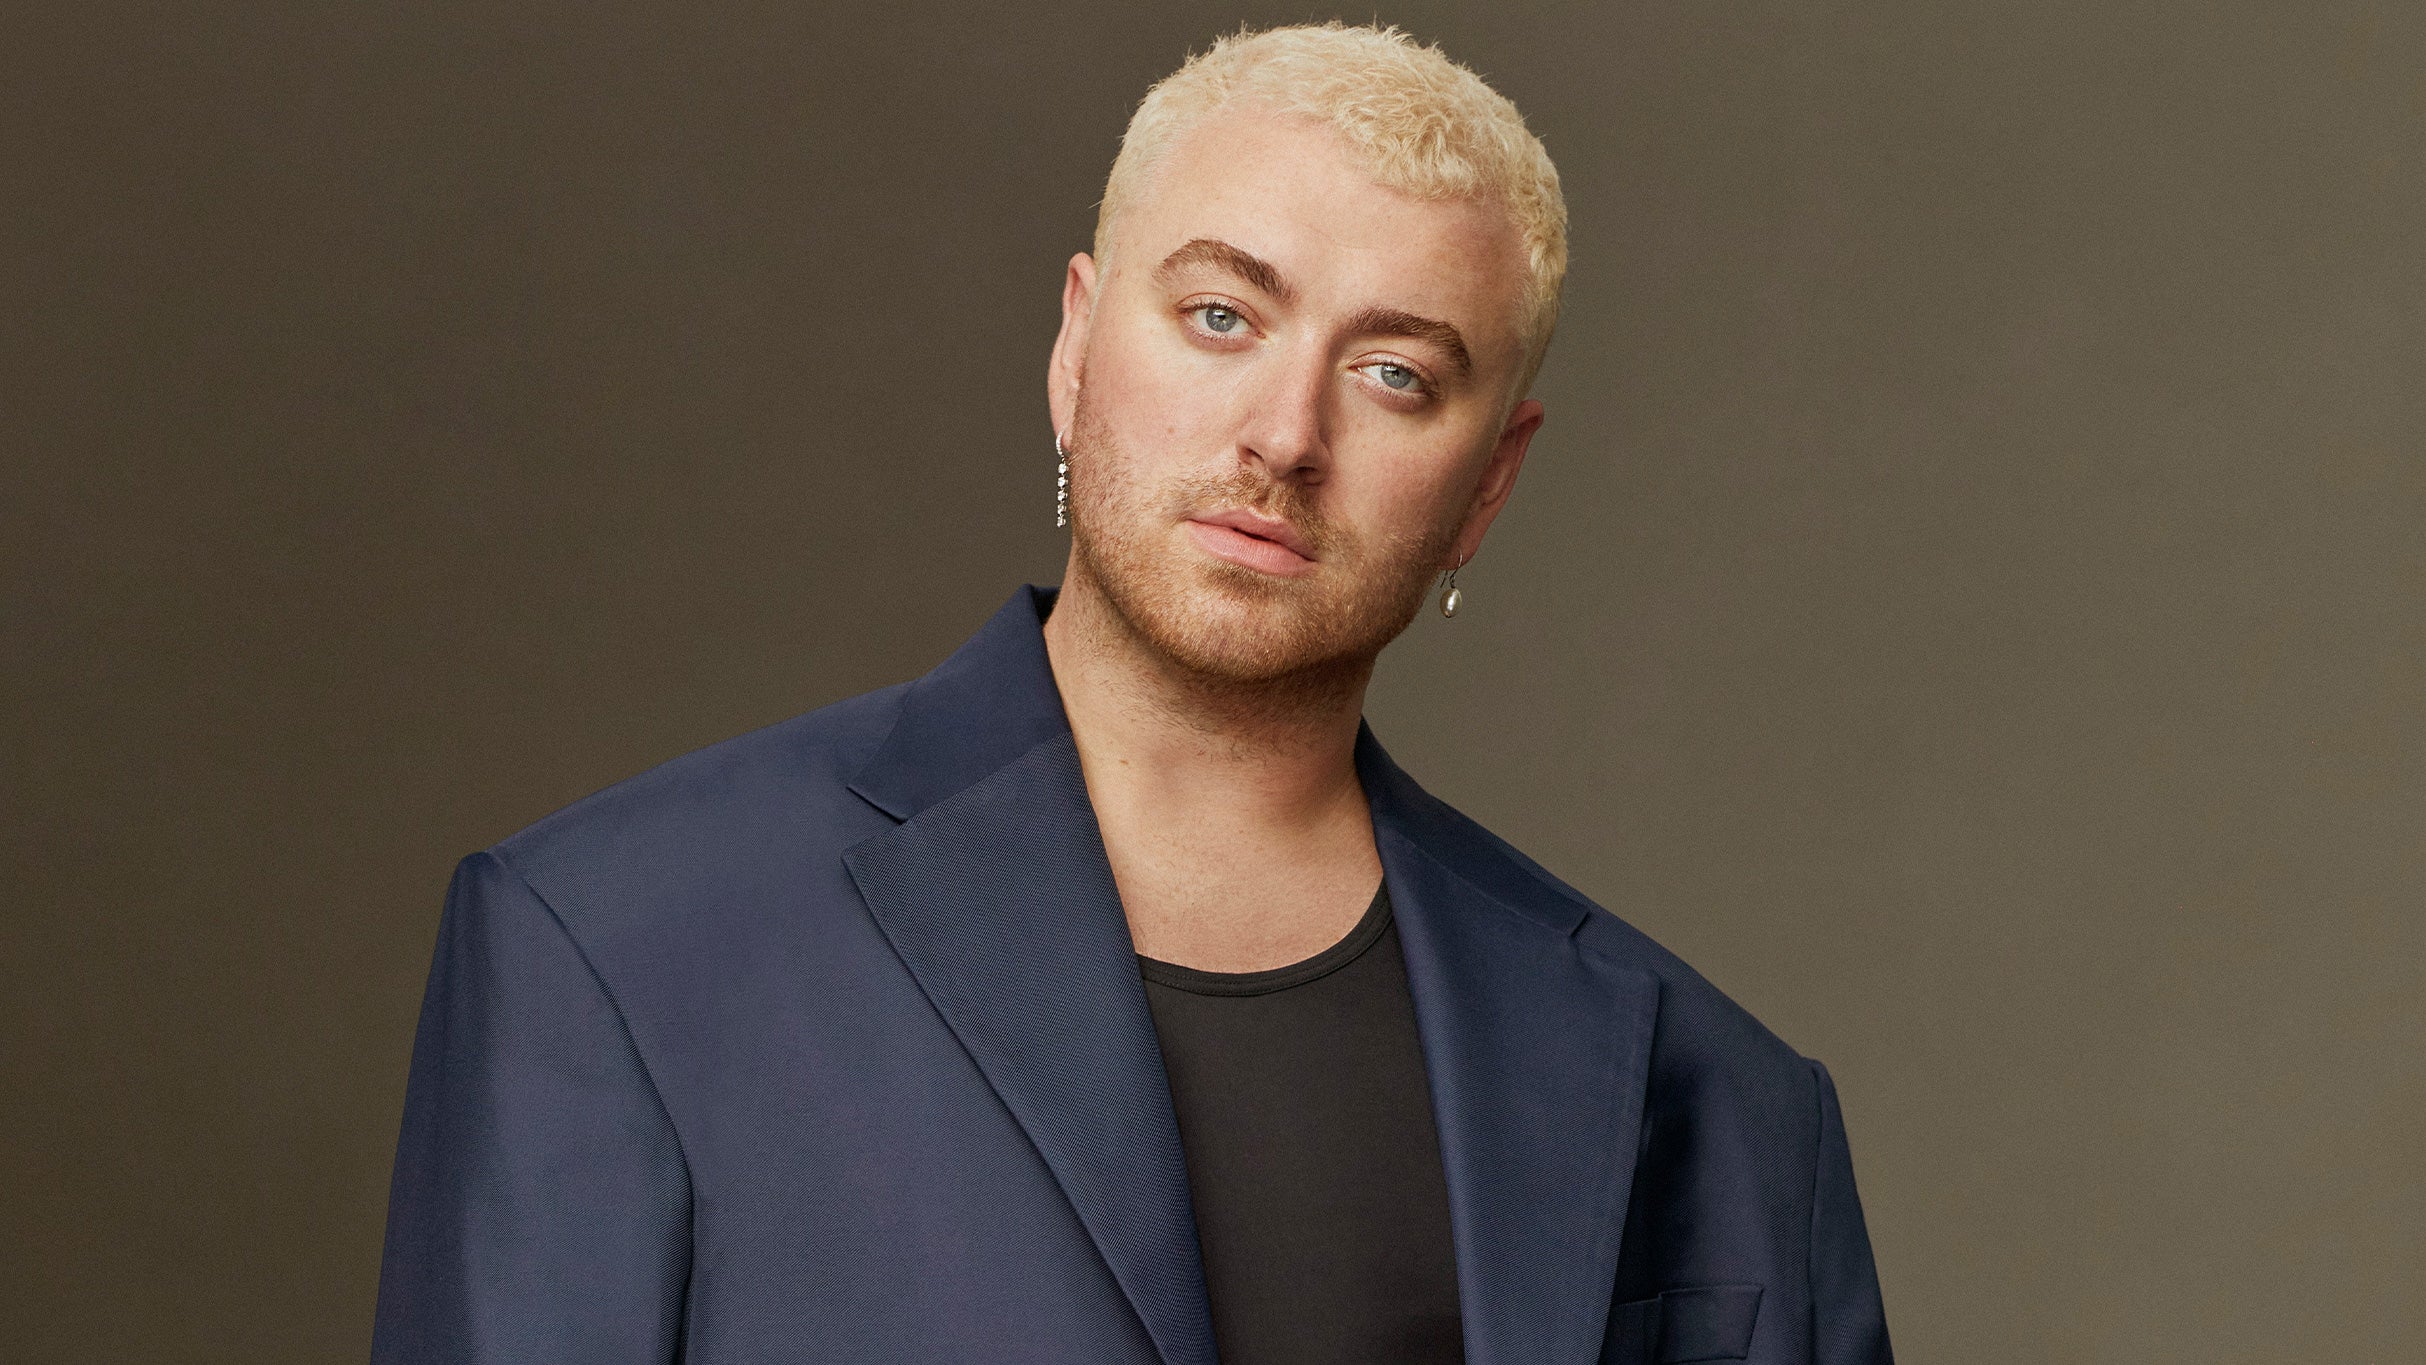 Sam Smith free presale passcode for early tickets in Denver